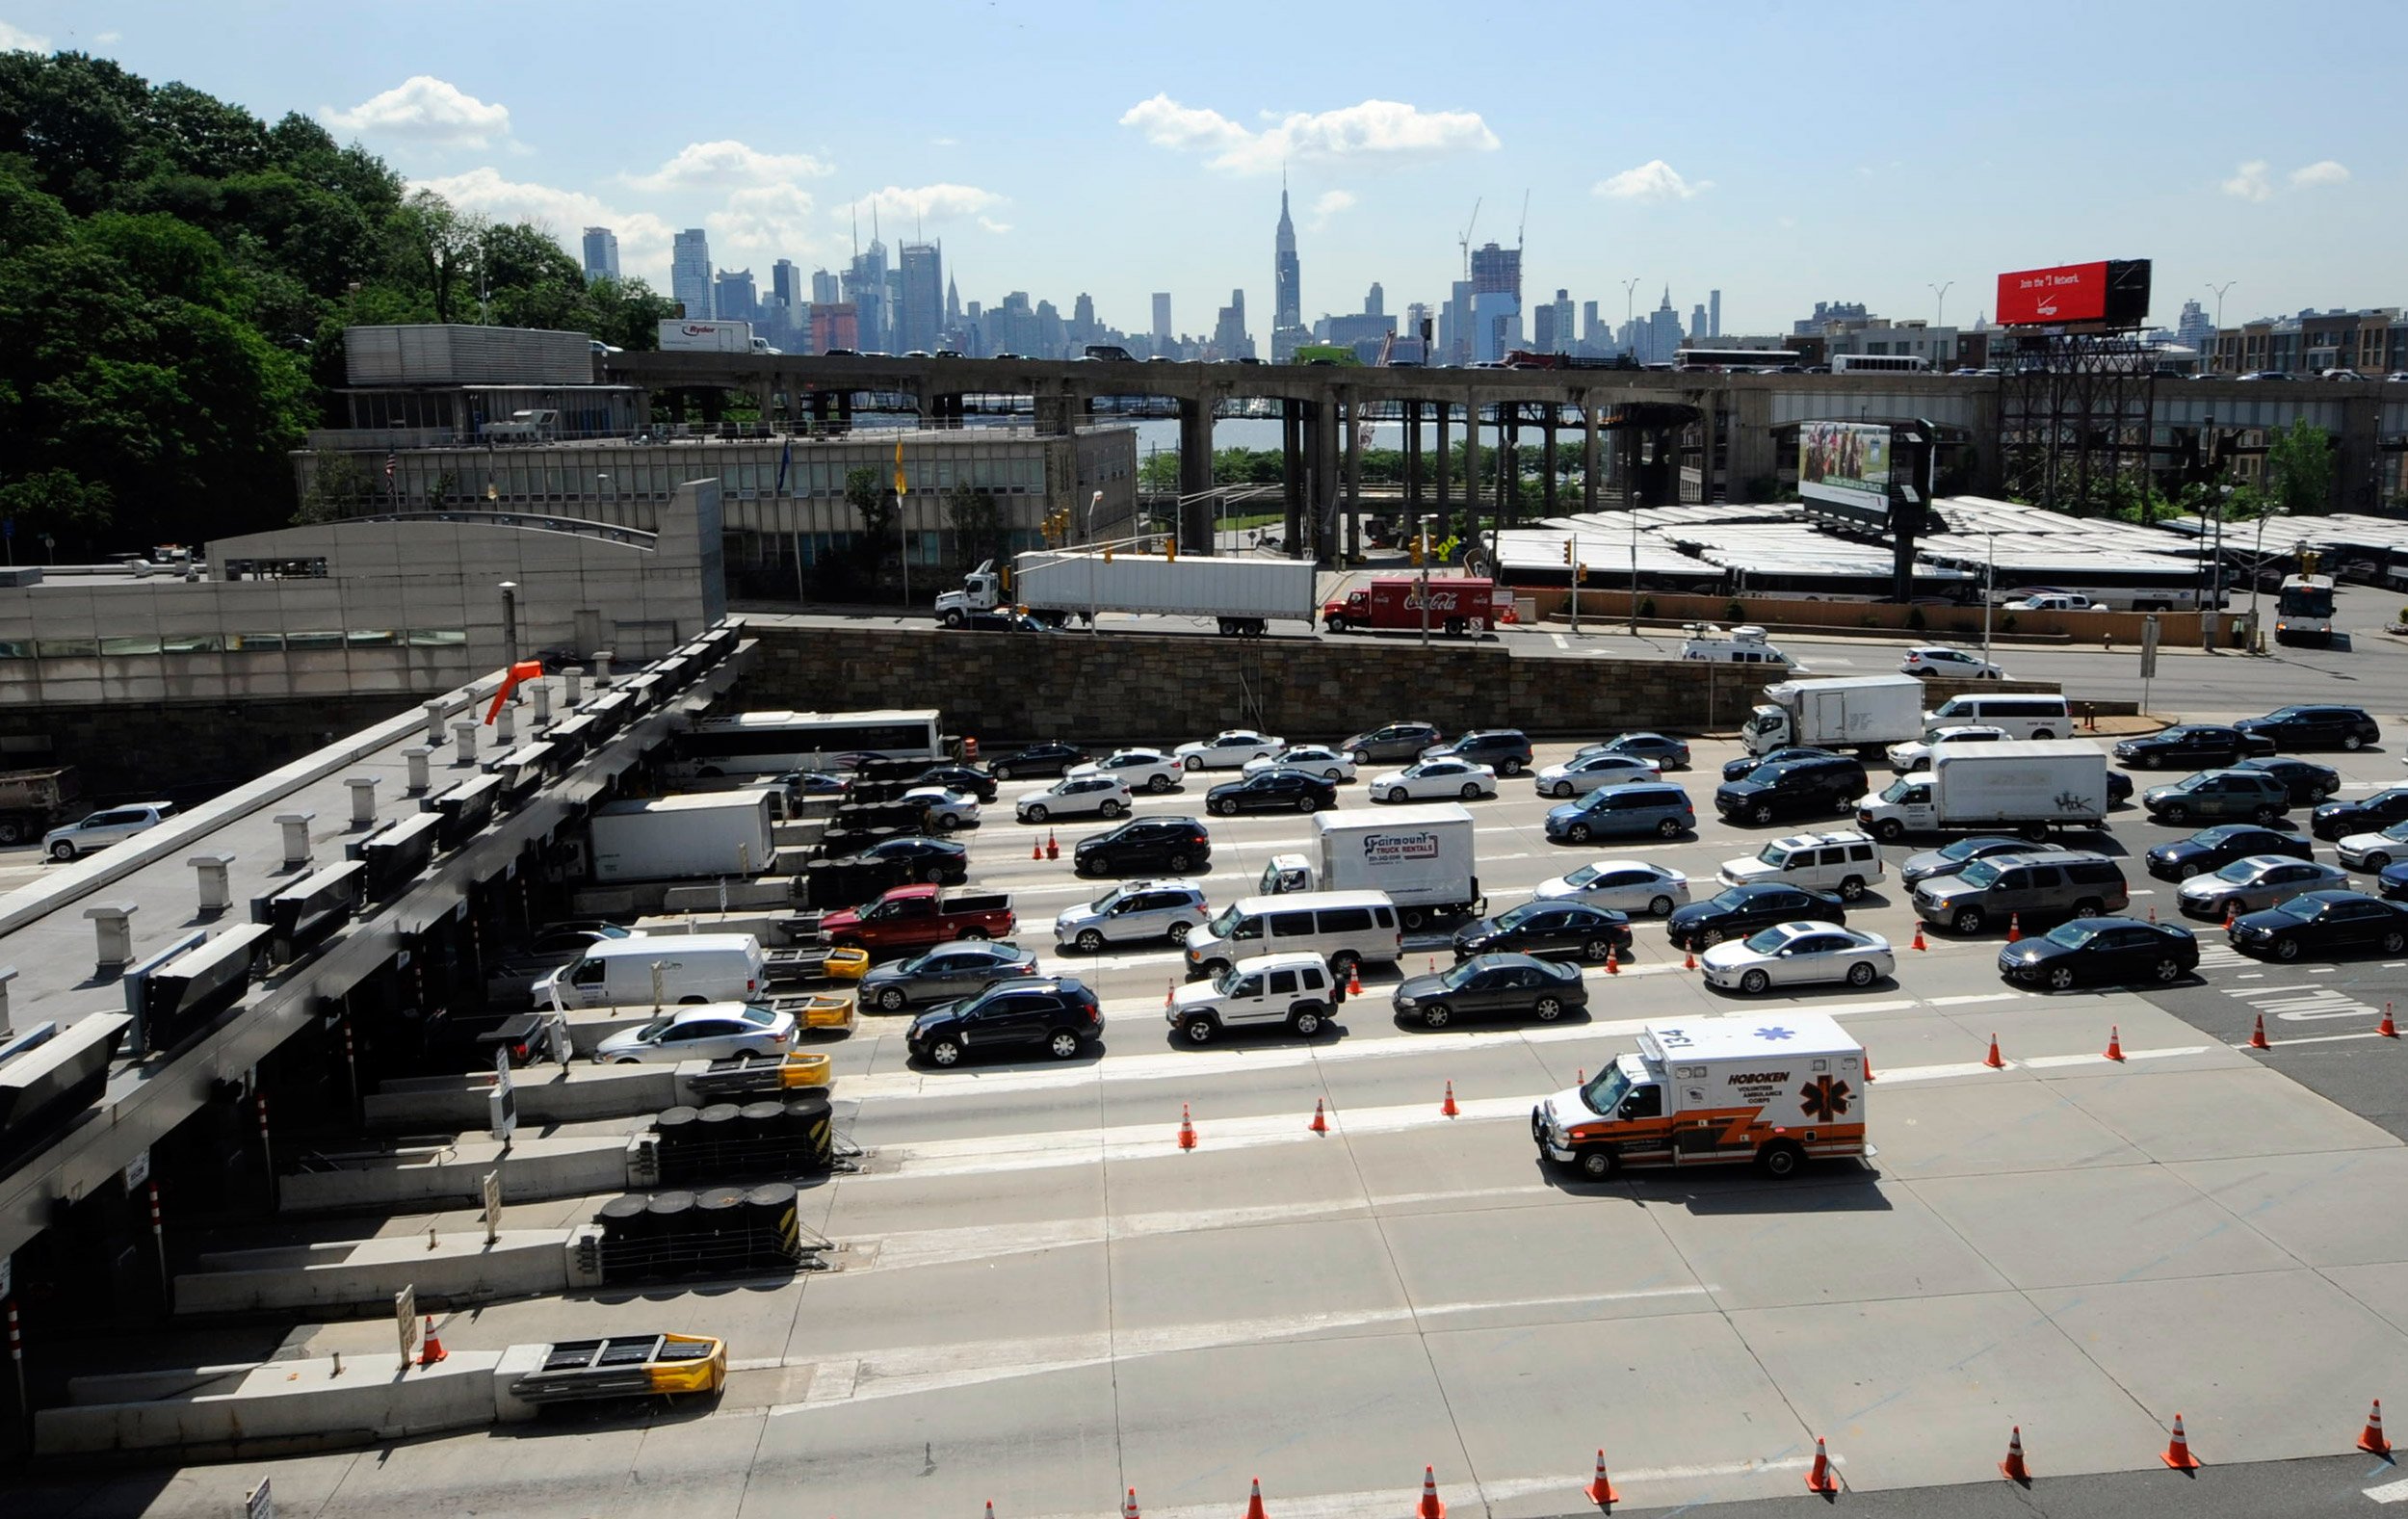 Two Buses Crash in New York's Lincoln Tunnel, Injuring More Than 30